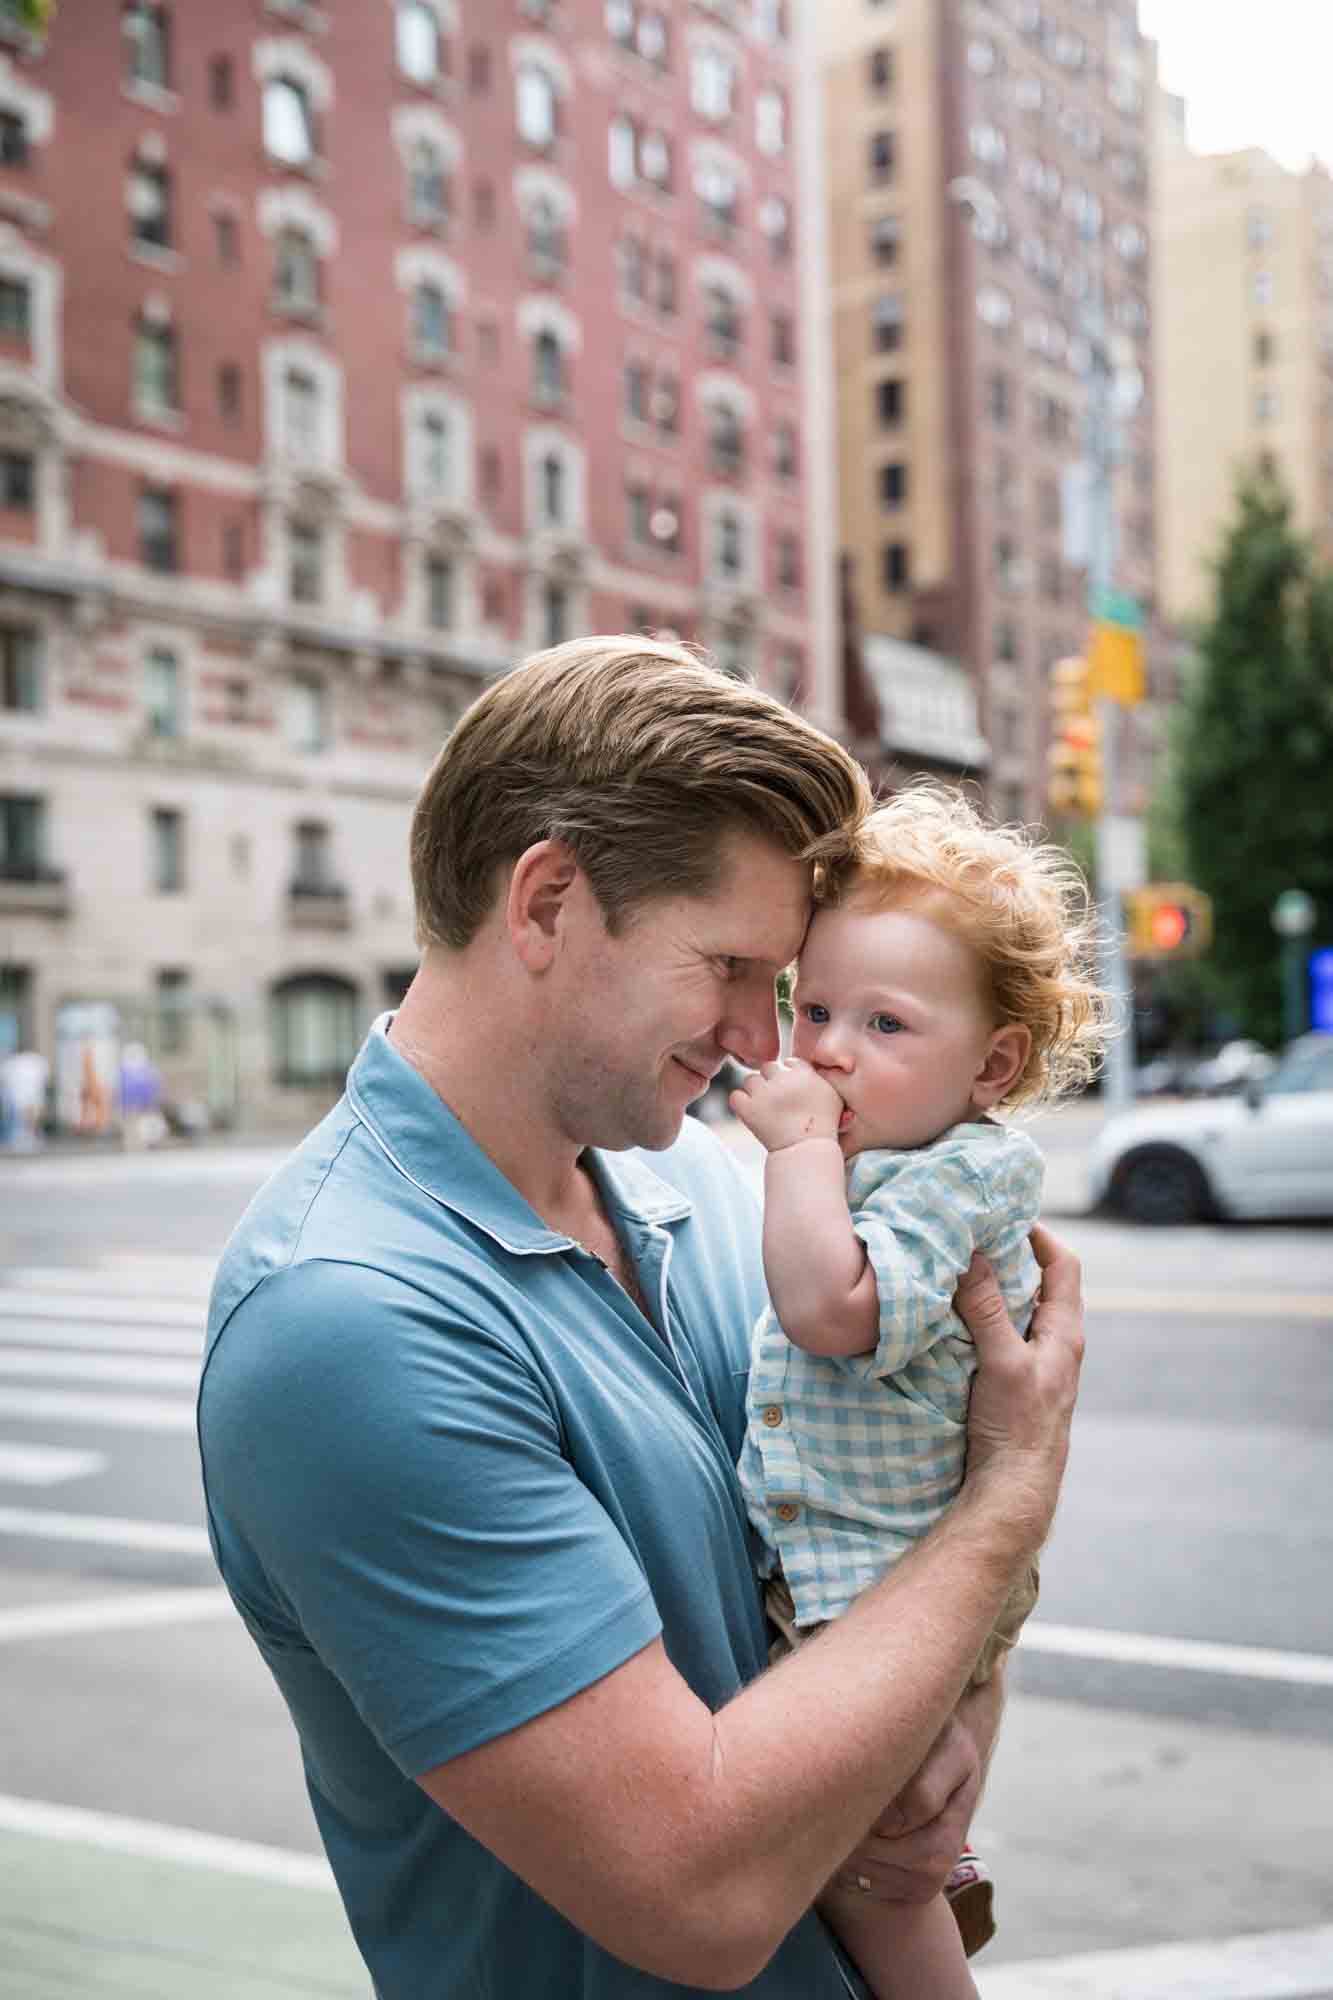 Father wearing blue shirt holding red-haired baby boy in front of NYC street